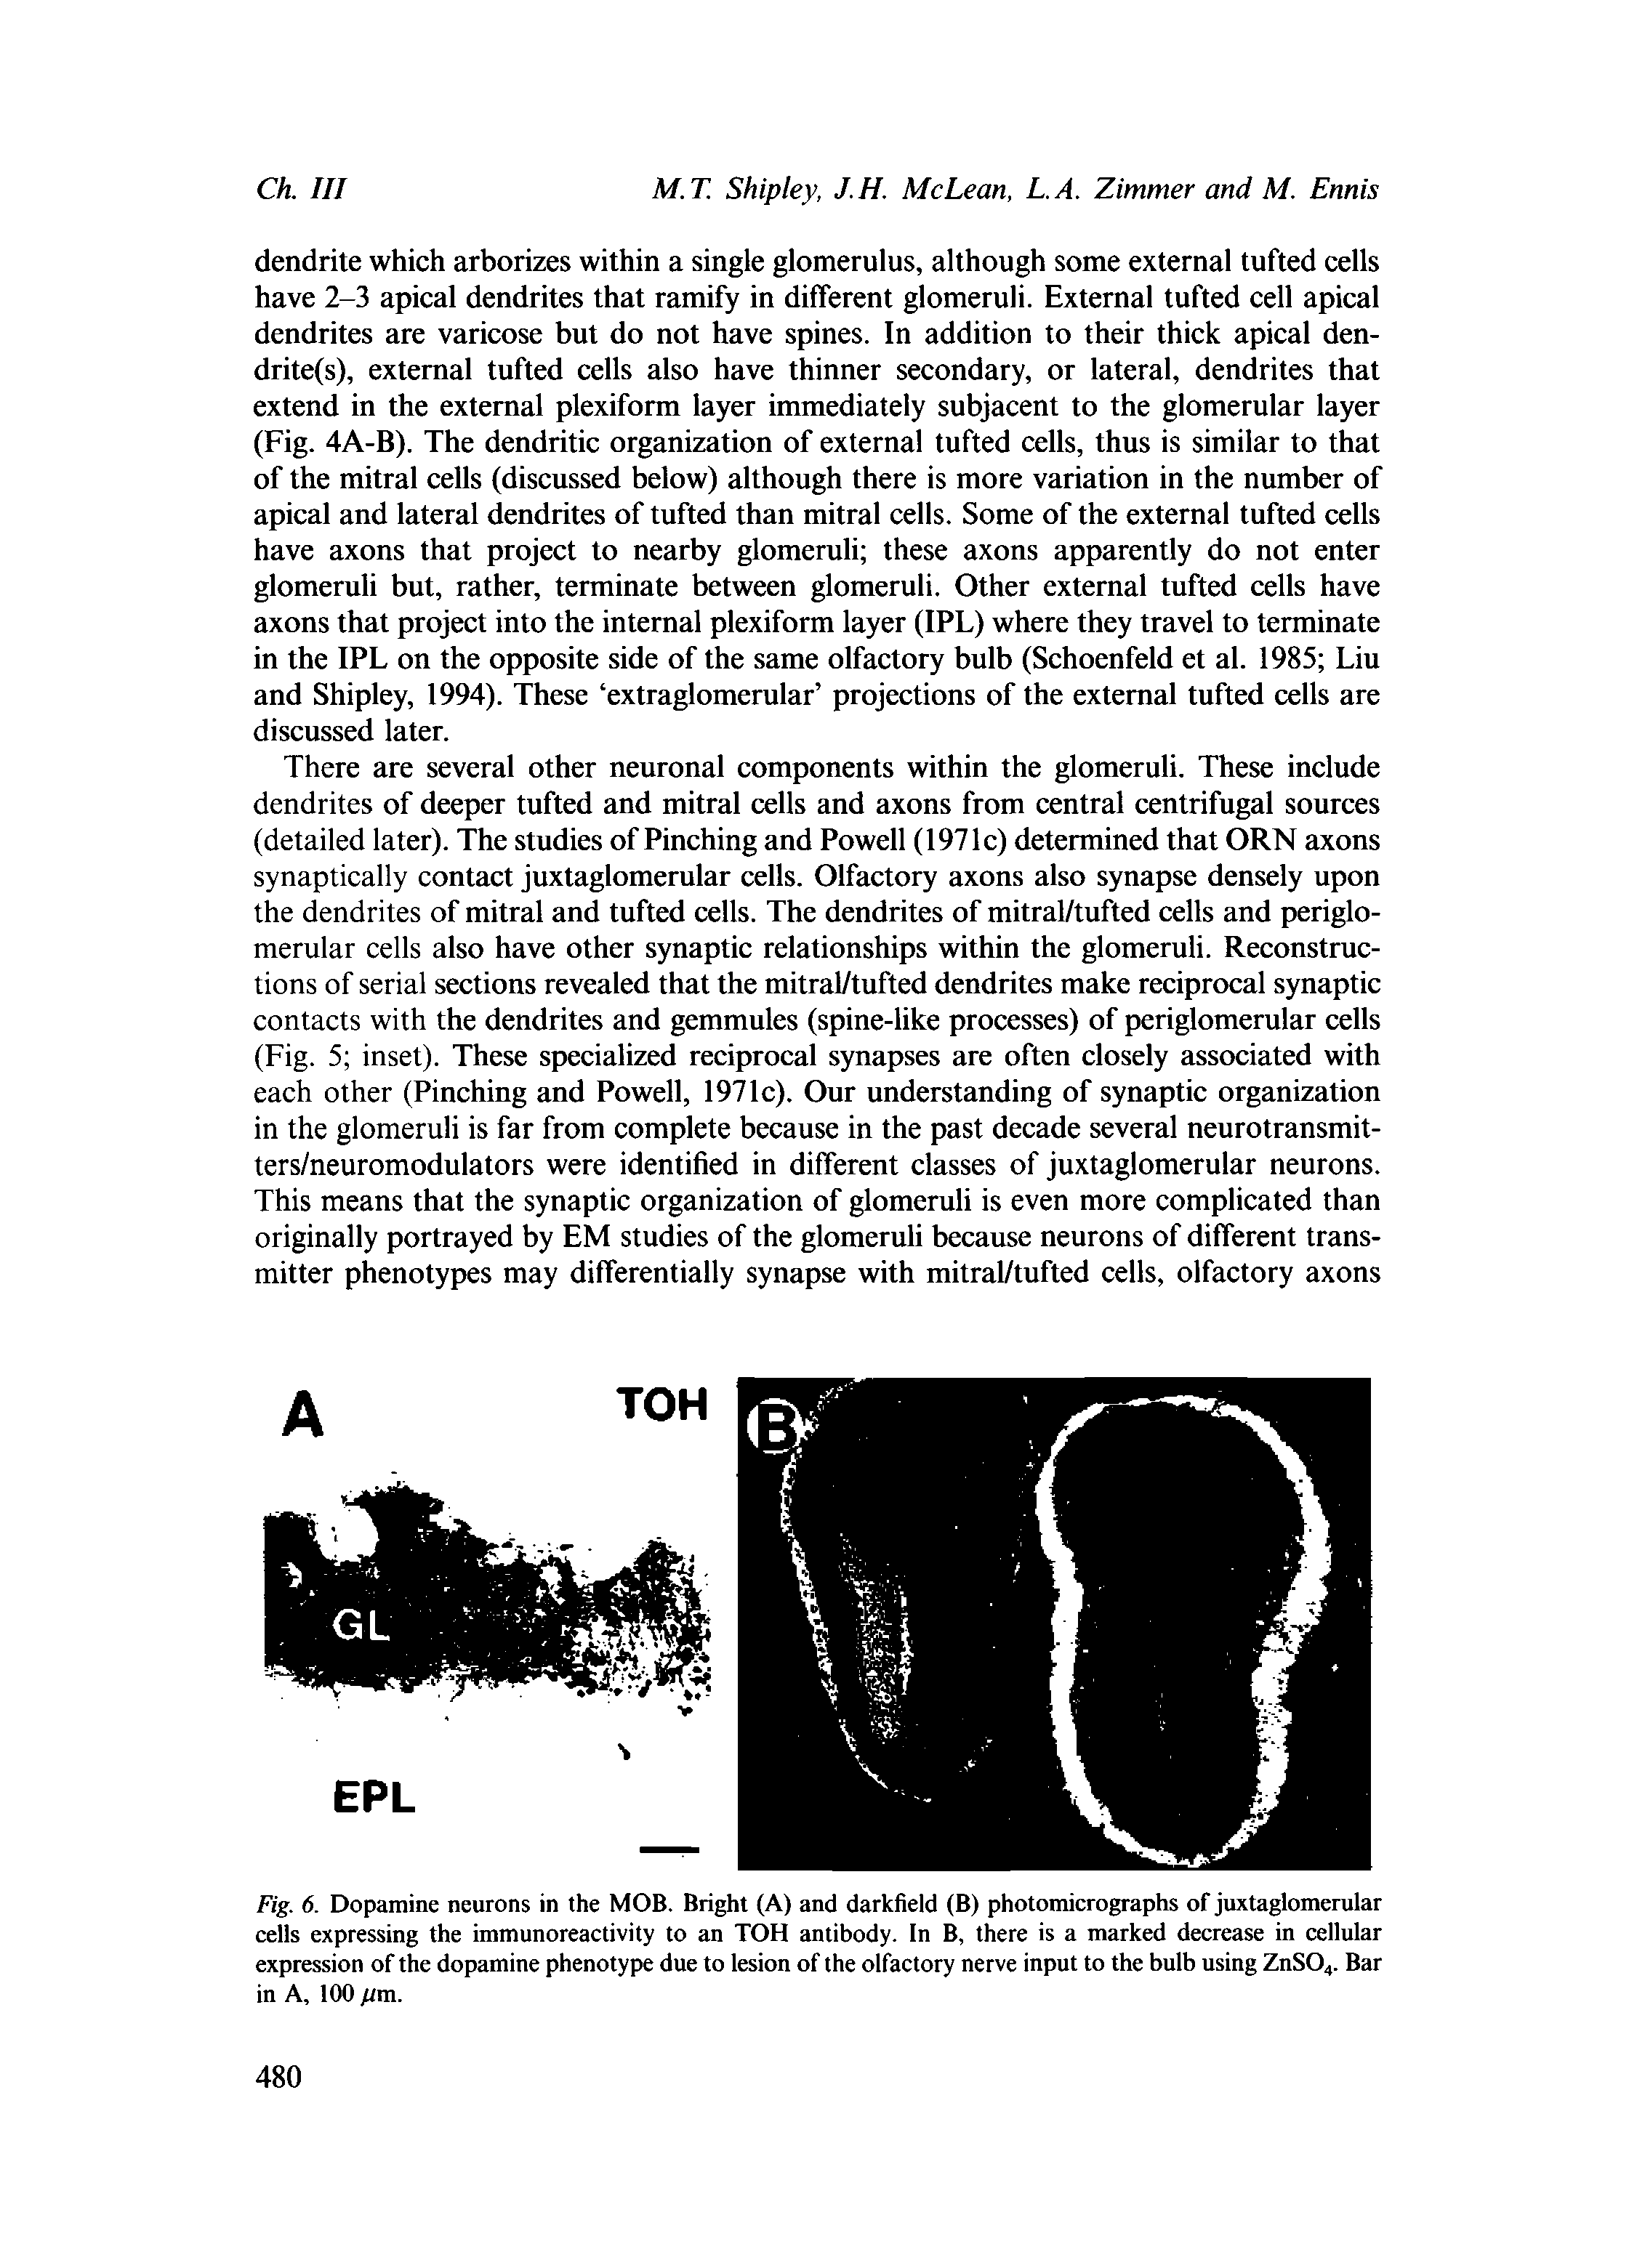 Fig. 6. Dopamine neurons in the MOB. Bright (A) and darkfield (B) photomierographs of juxtaglomerular cells expressing the immunoreactivity to an TOH antibody. In B, there is a marked decrease in cellular expression of the dopamine phenotype due to lesion of the olfactory nerve input to the bulb using ZnS04. Bar in A, 100 pm.